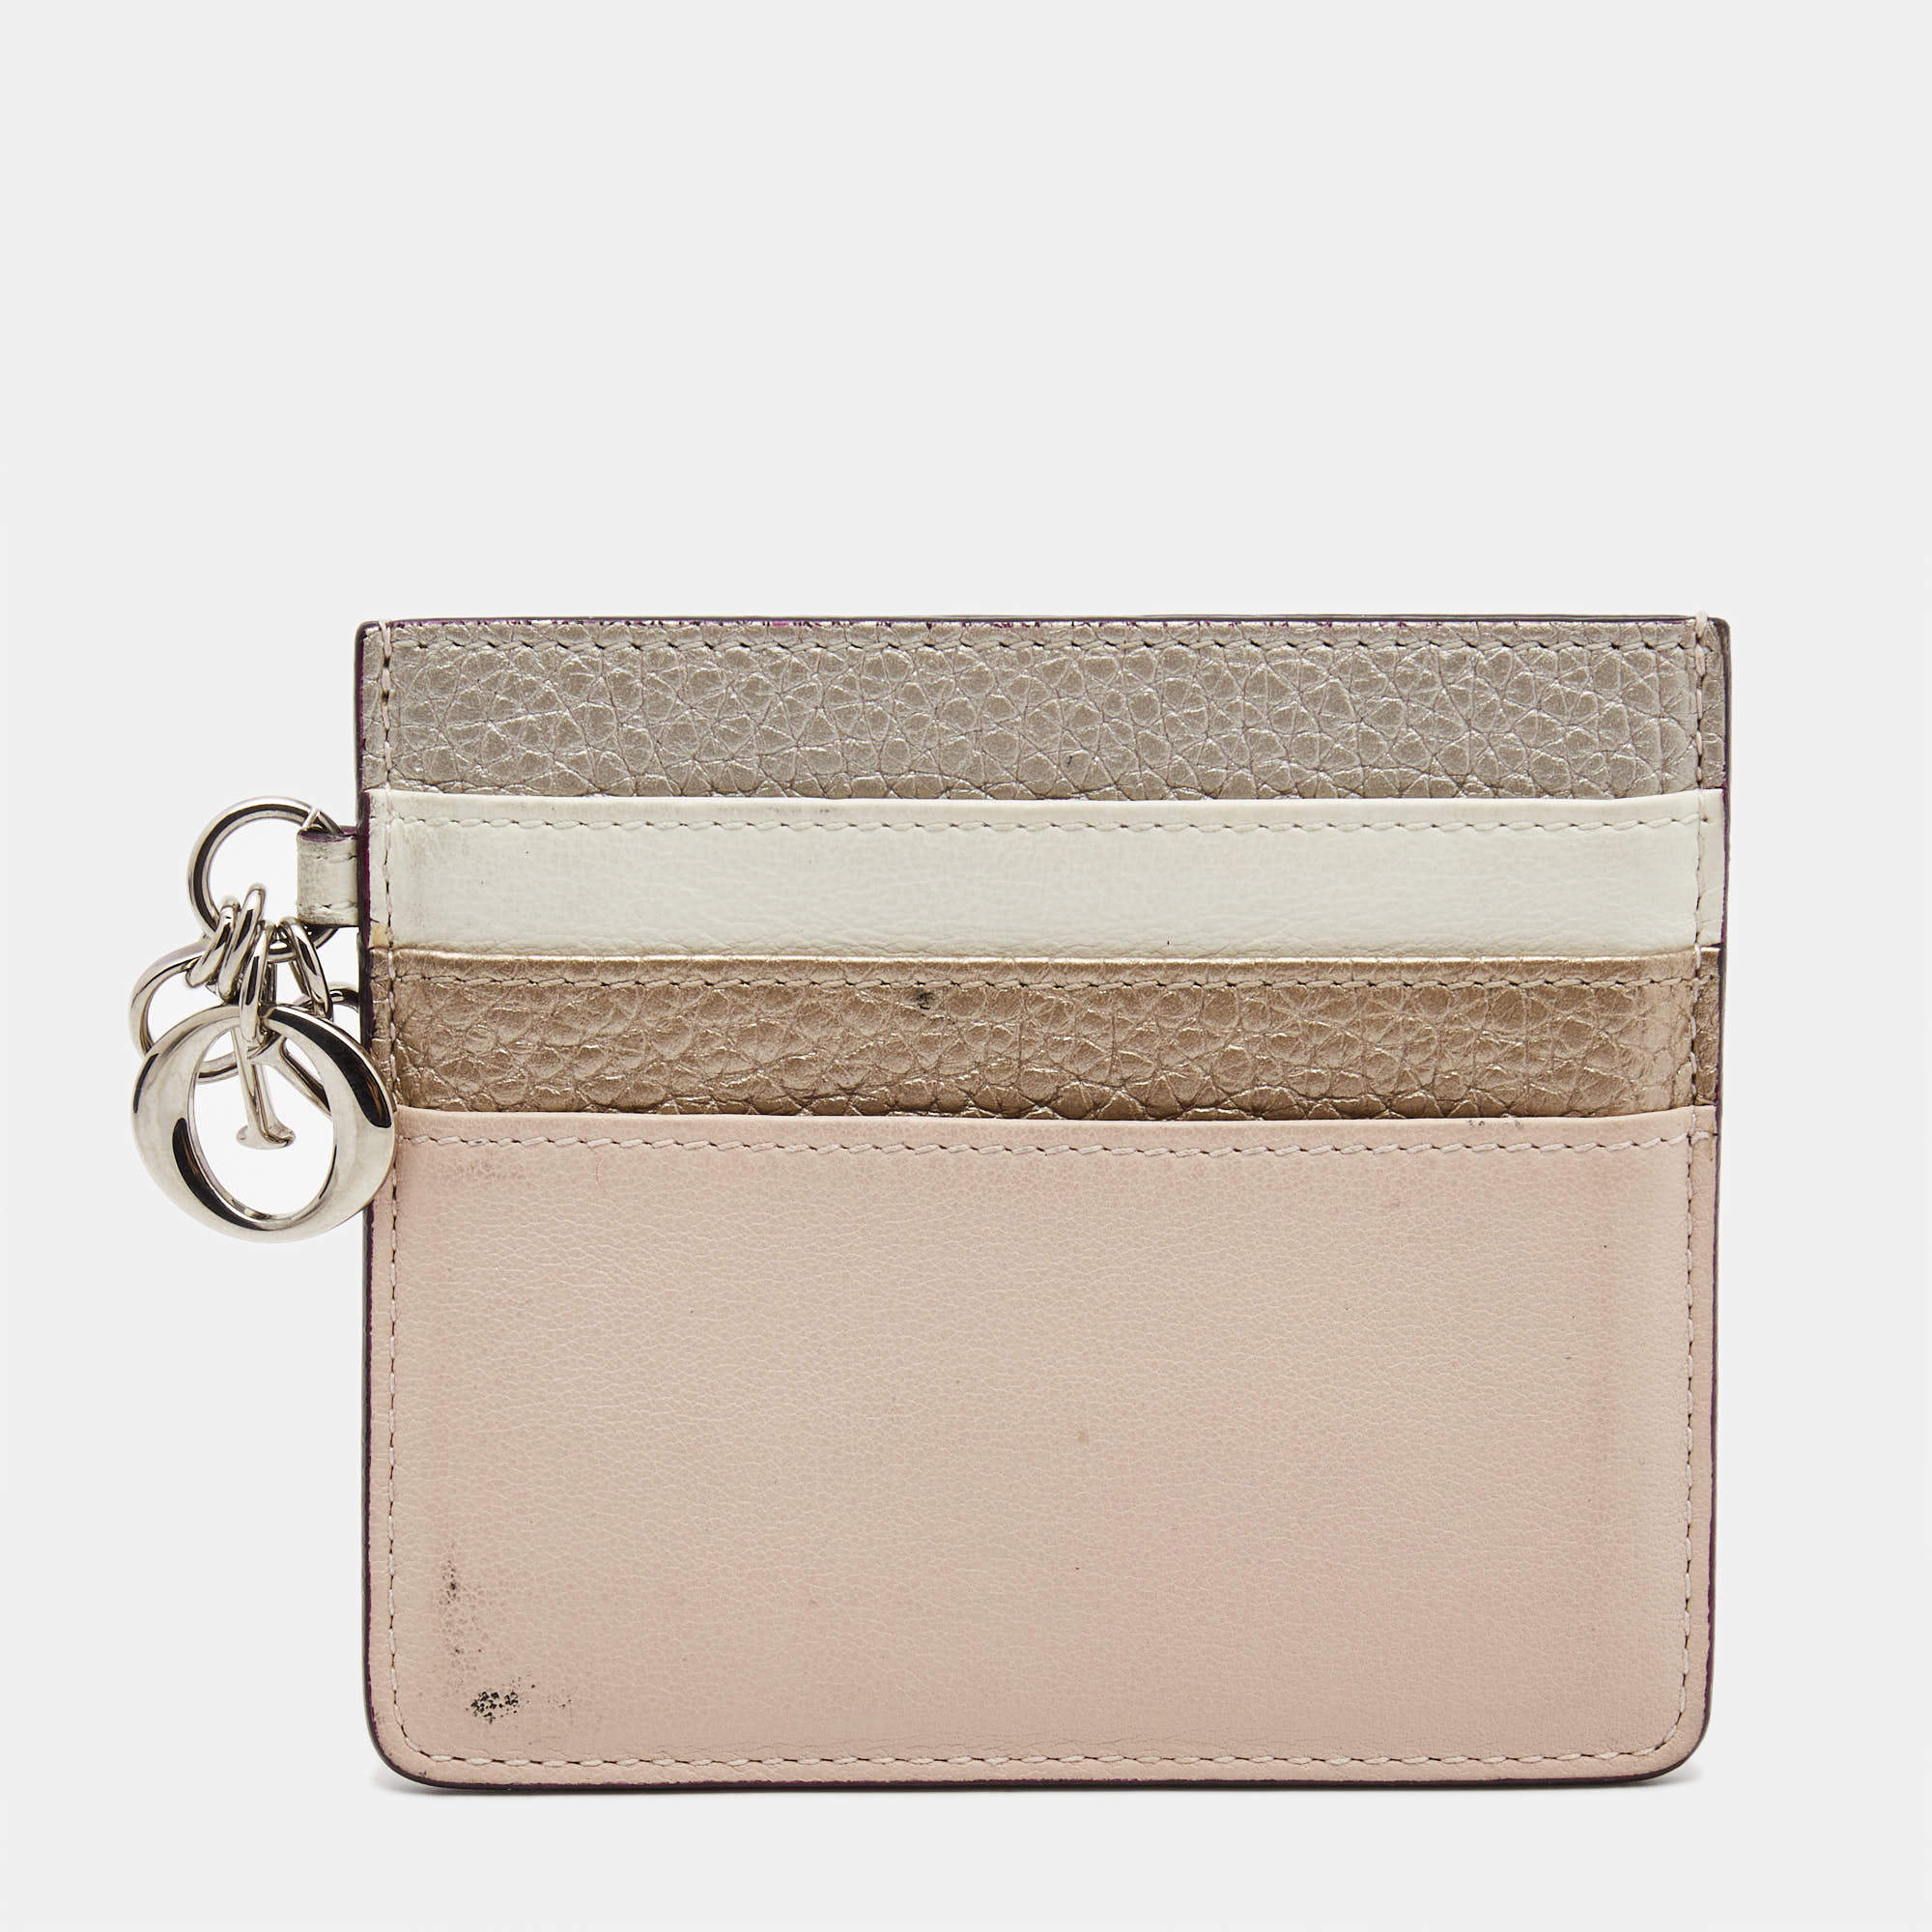 Dior Multicolor Leather Lady Dior Card Holder